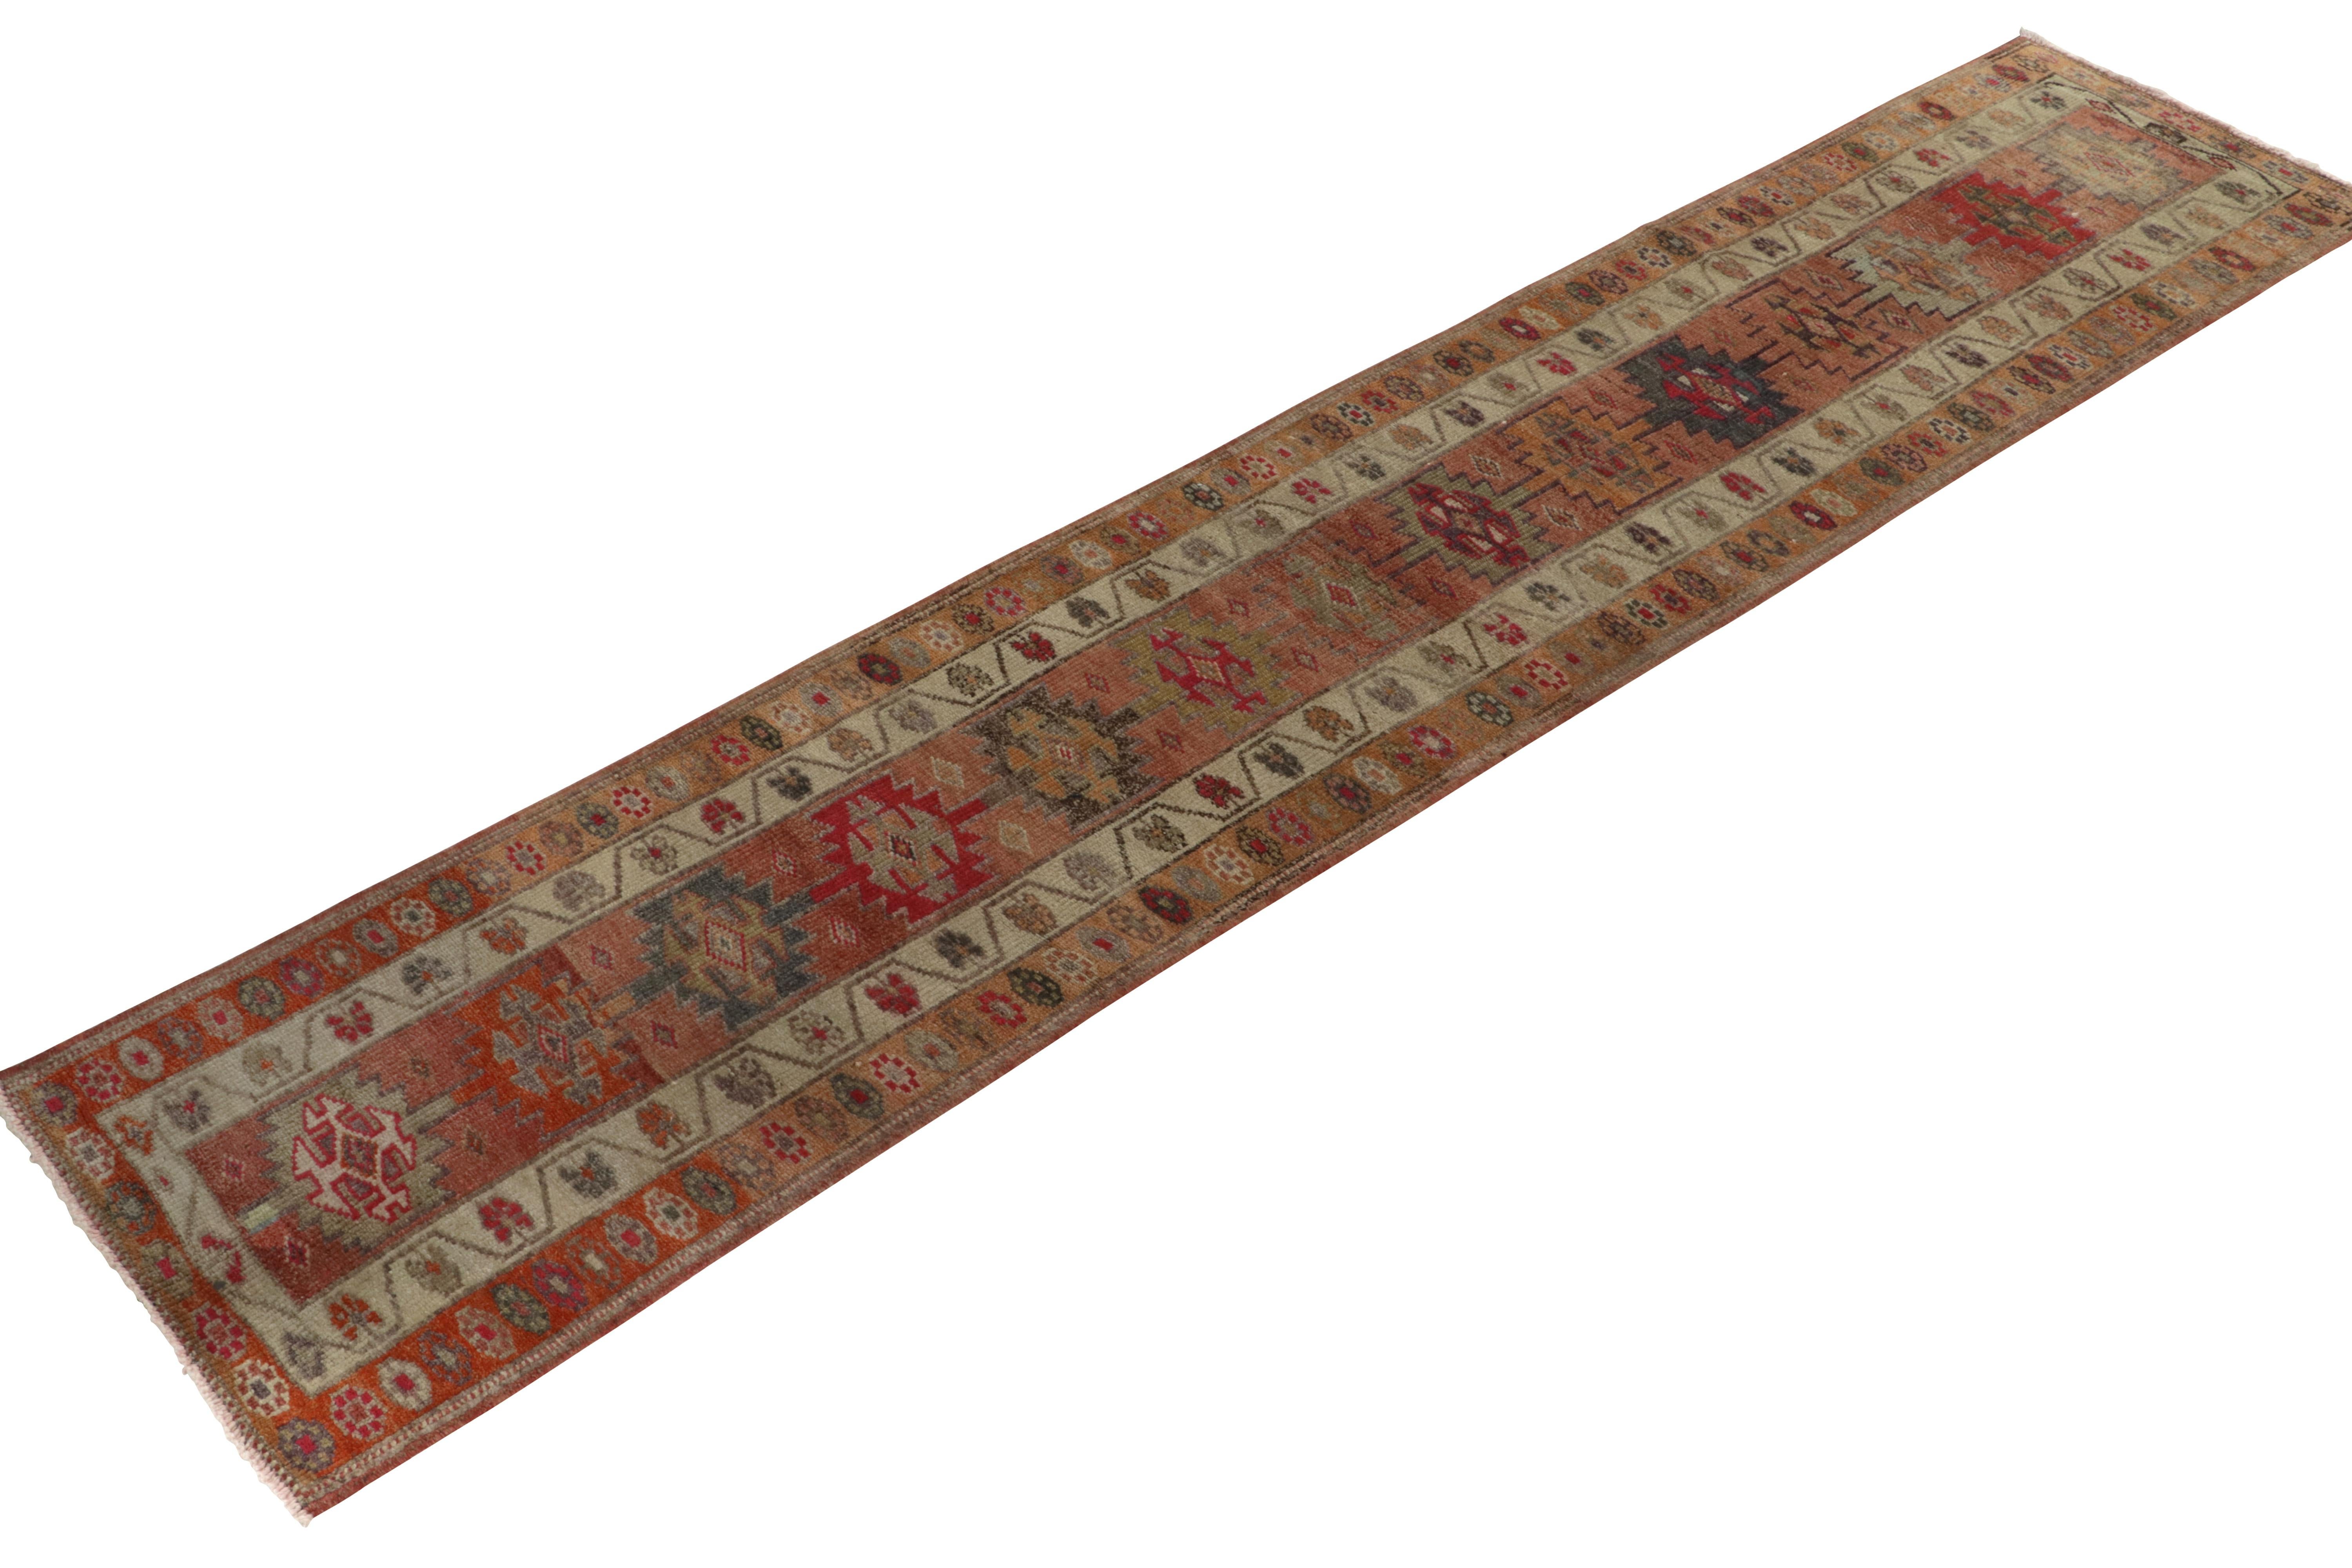 From R&K Principal Josh Nazmiyal’s latest acquisitions, a distinct vintage runner originating from Turkey circa 1950-1960. 

On the Design: The symmetric geometric design features a series of traditional motifs continuing from end to end with a